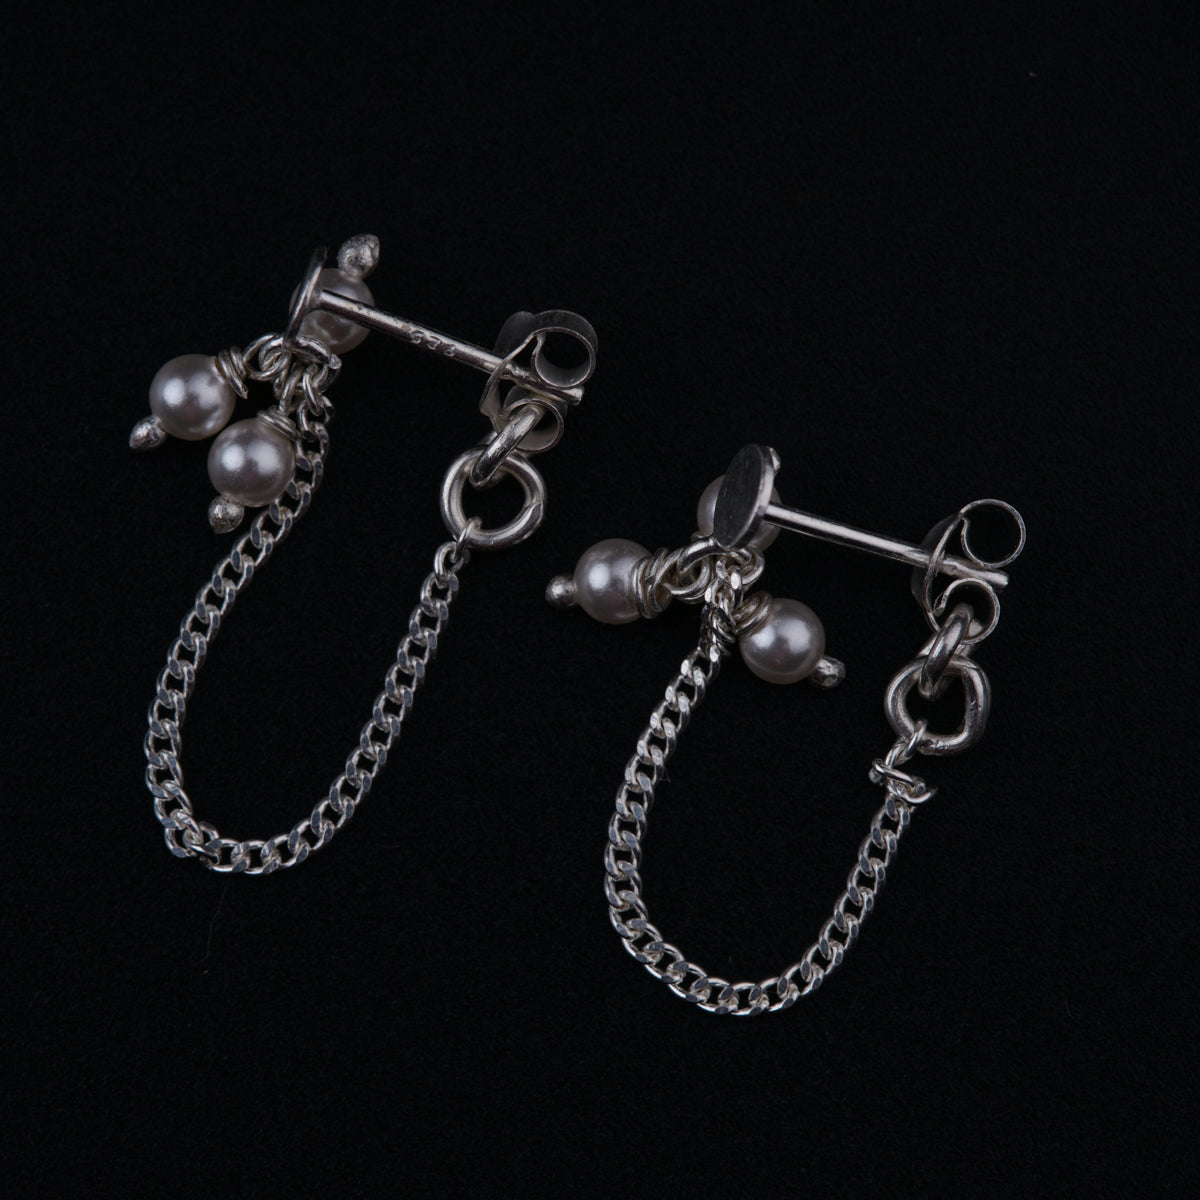 a pair of earrings with chains and pearls